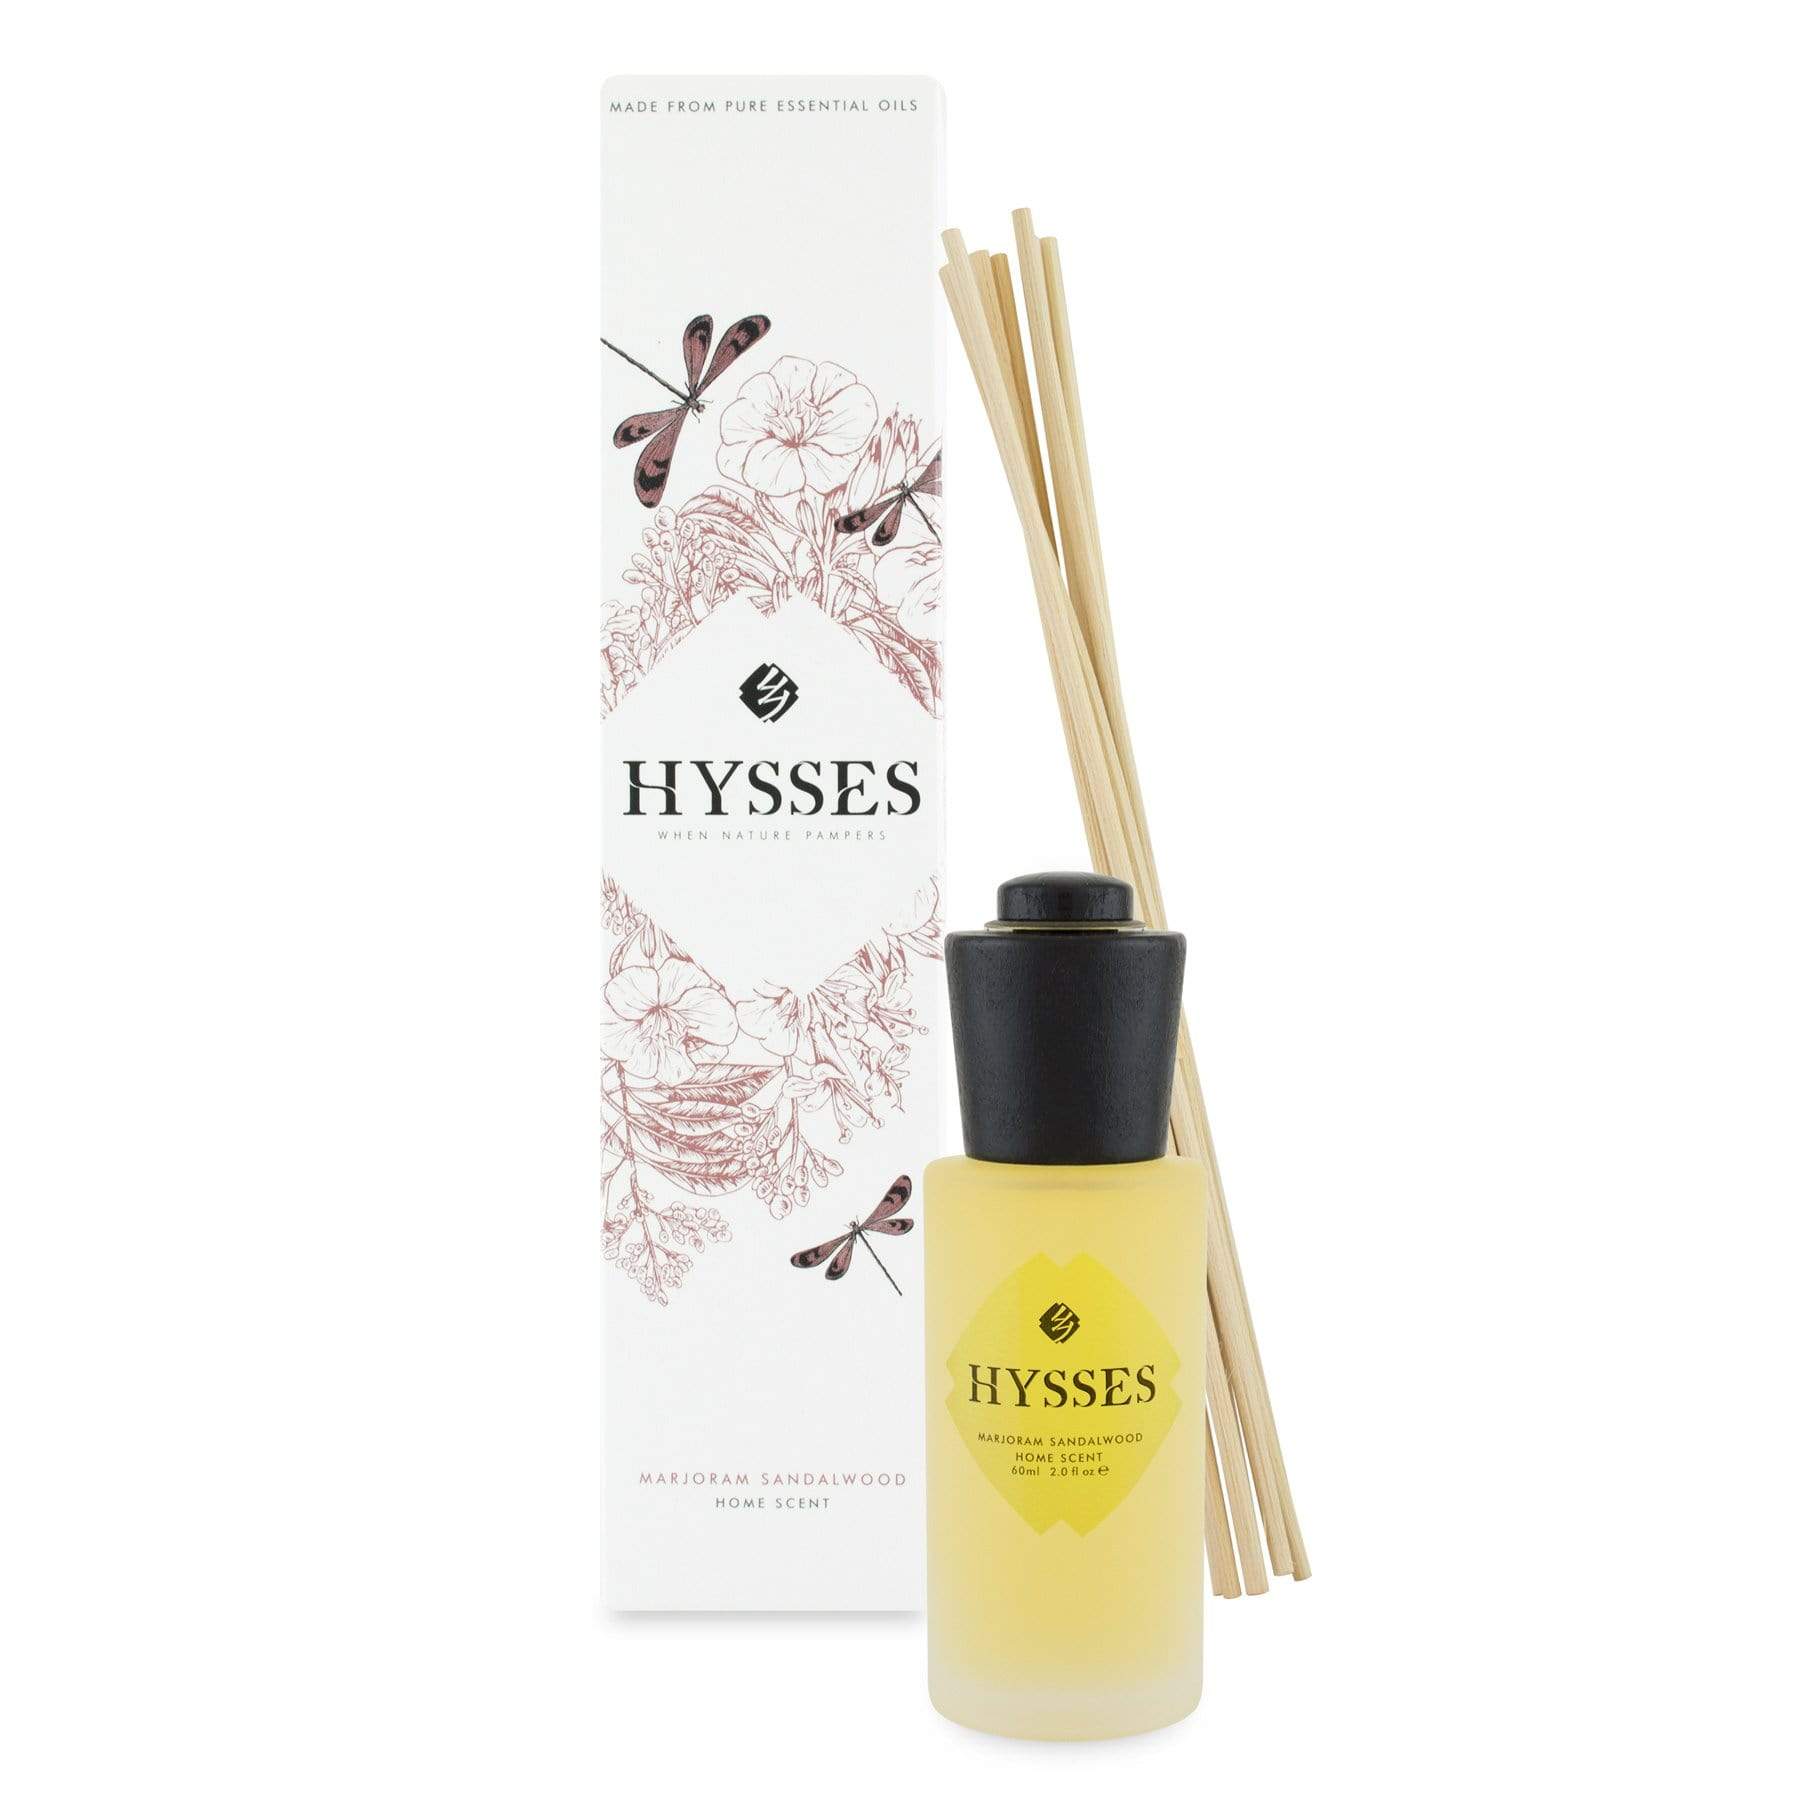 Hysses Home Scents 60ml Home Scent Reed Diffuser Marjoram Sandalwood